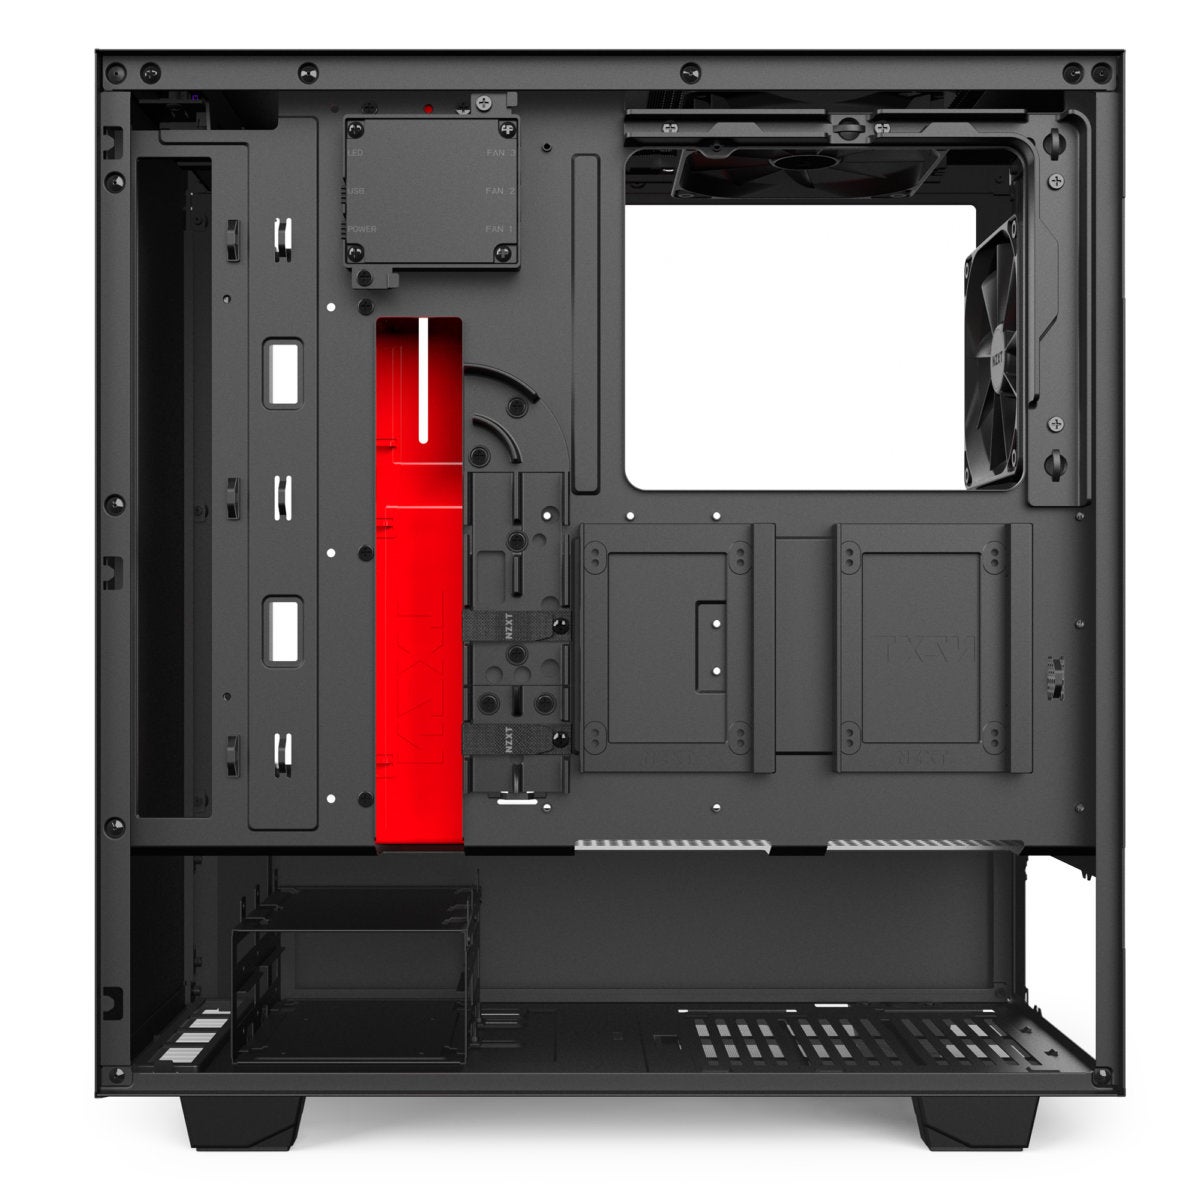 h500i black red open side straight